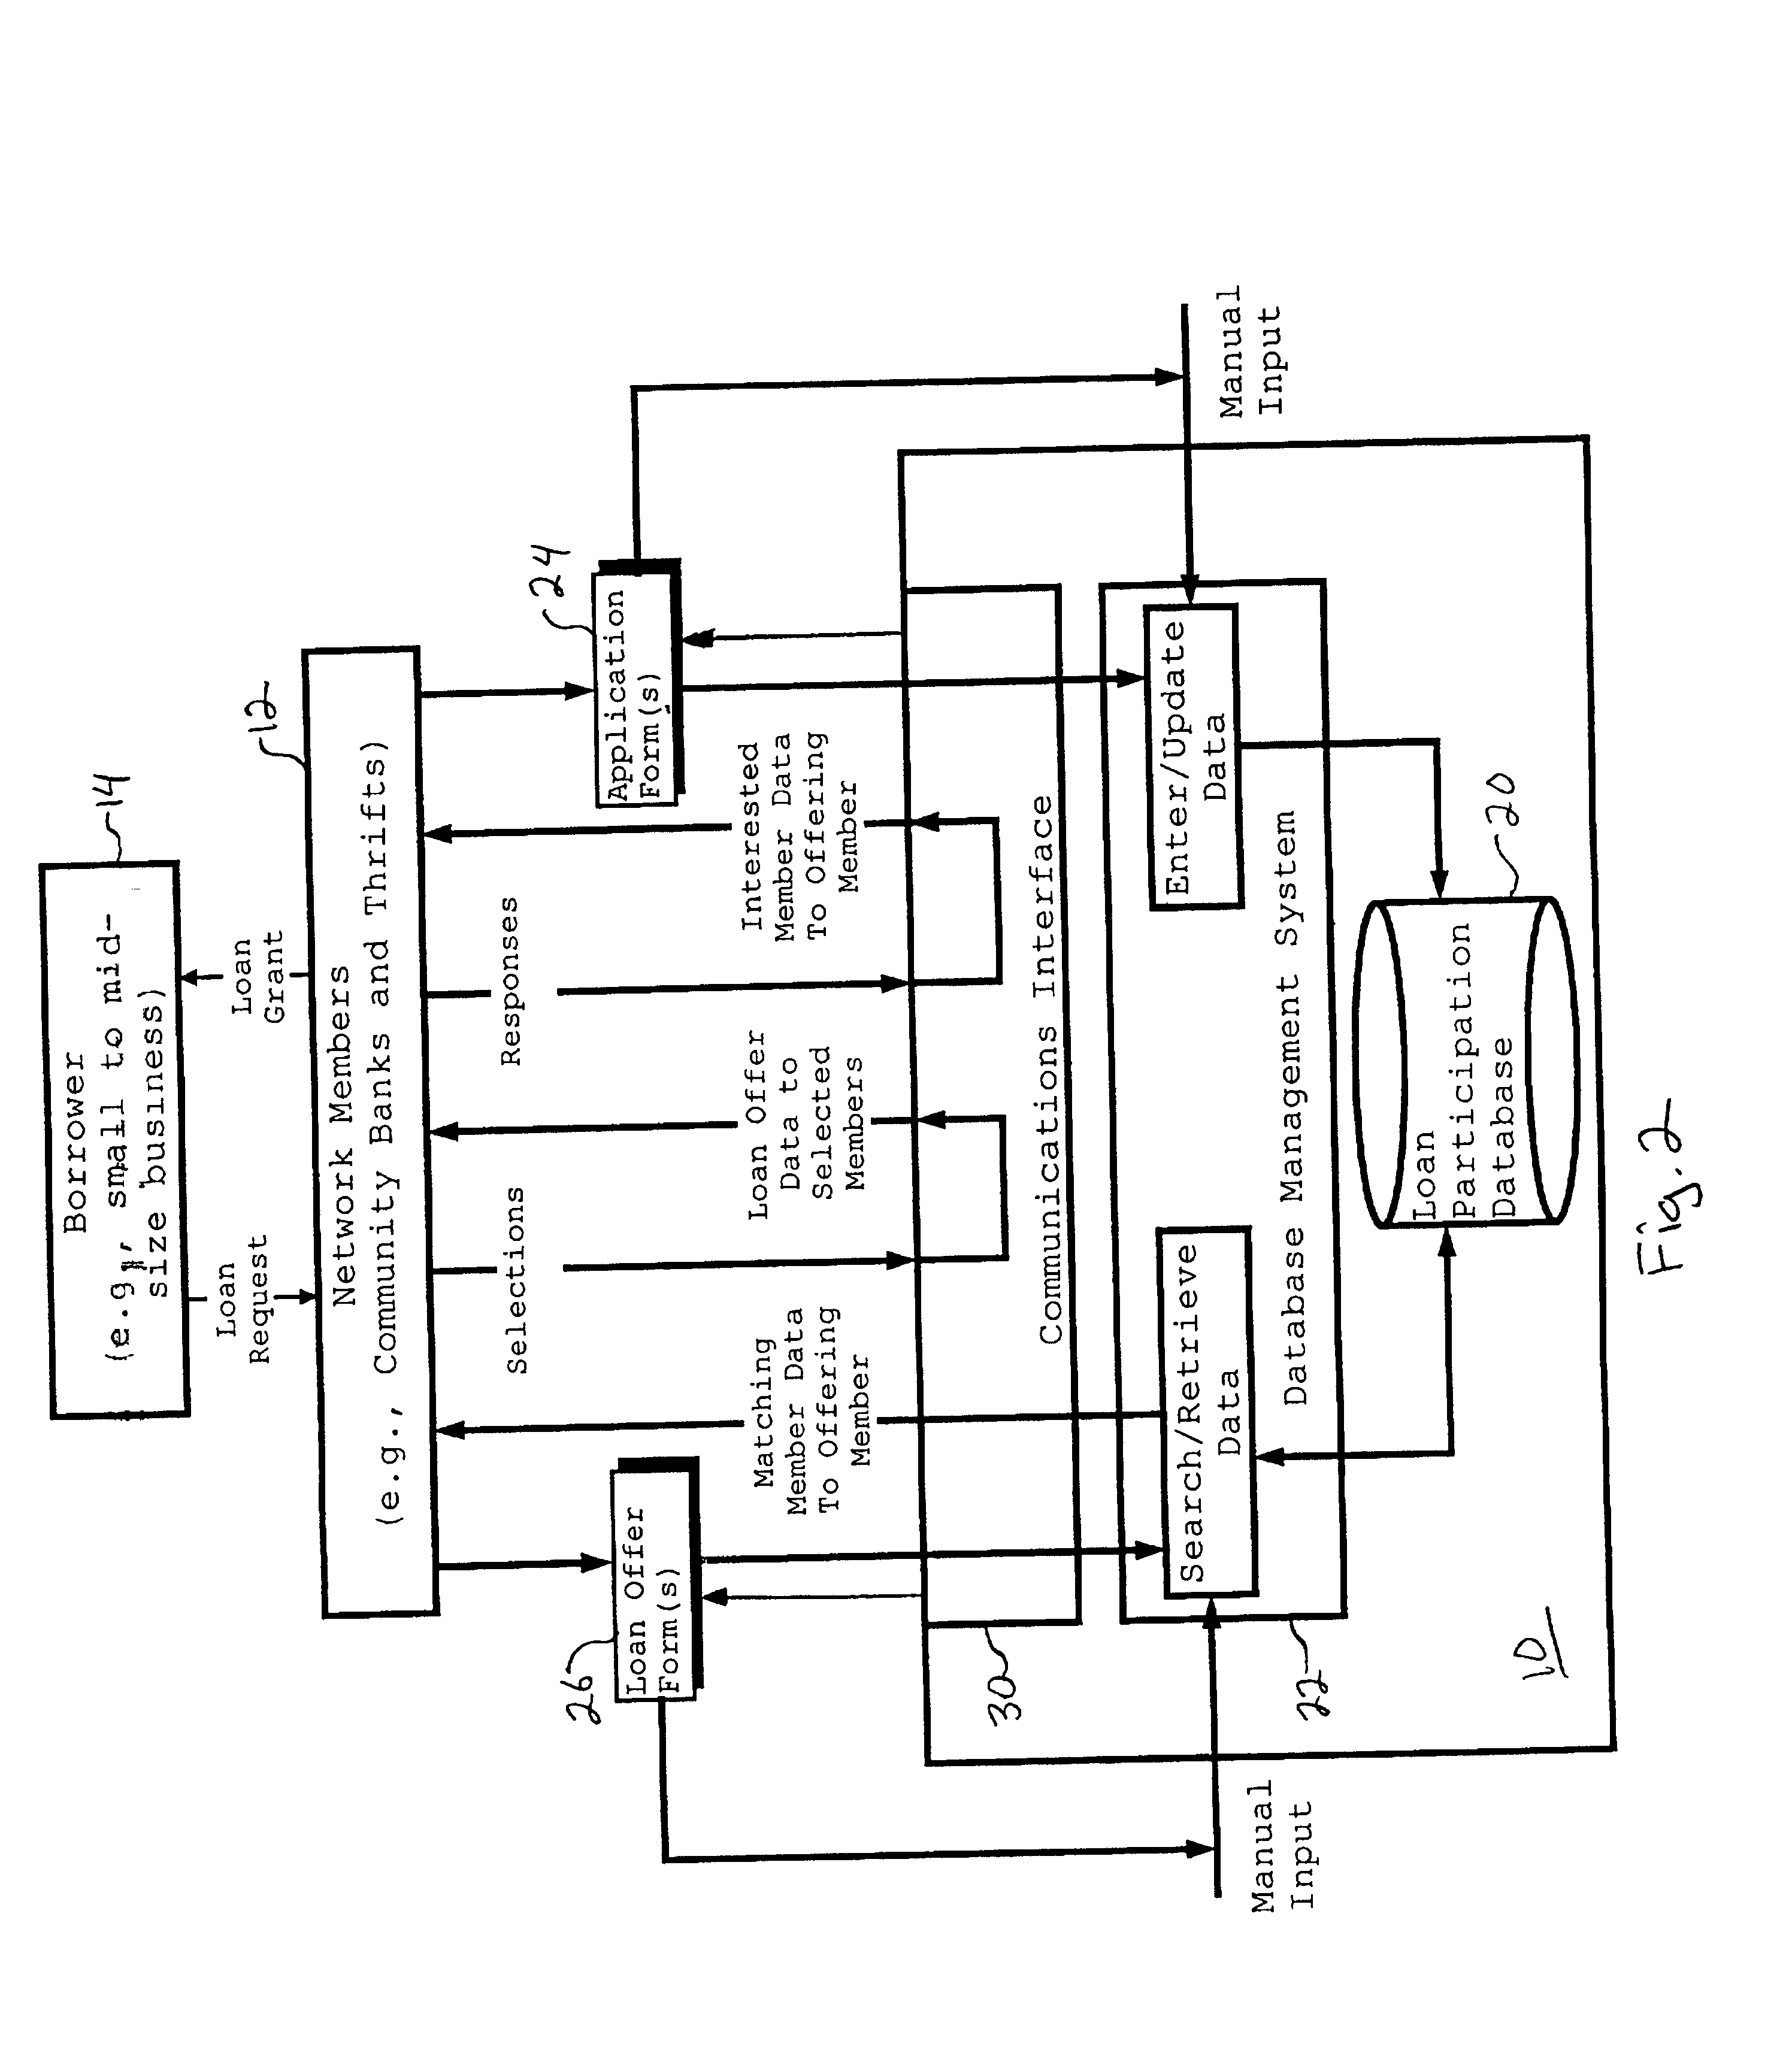 Computerized system and method for establishing a loan participation network